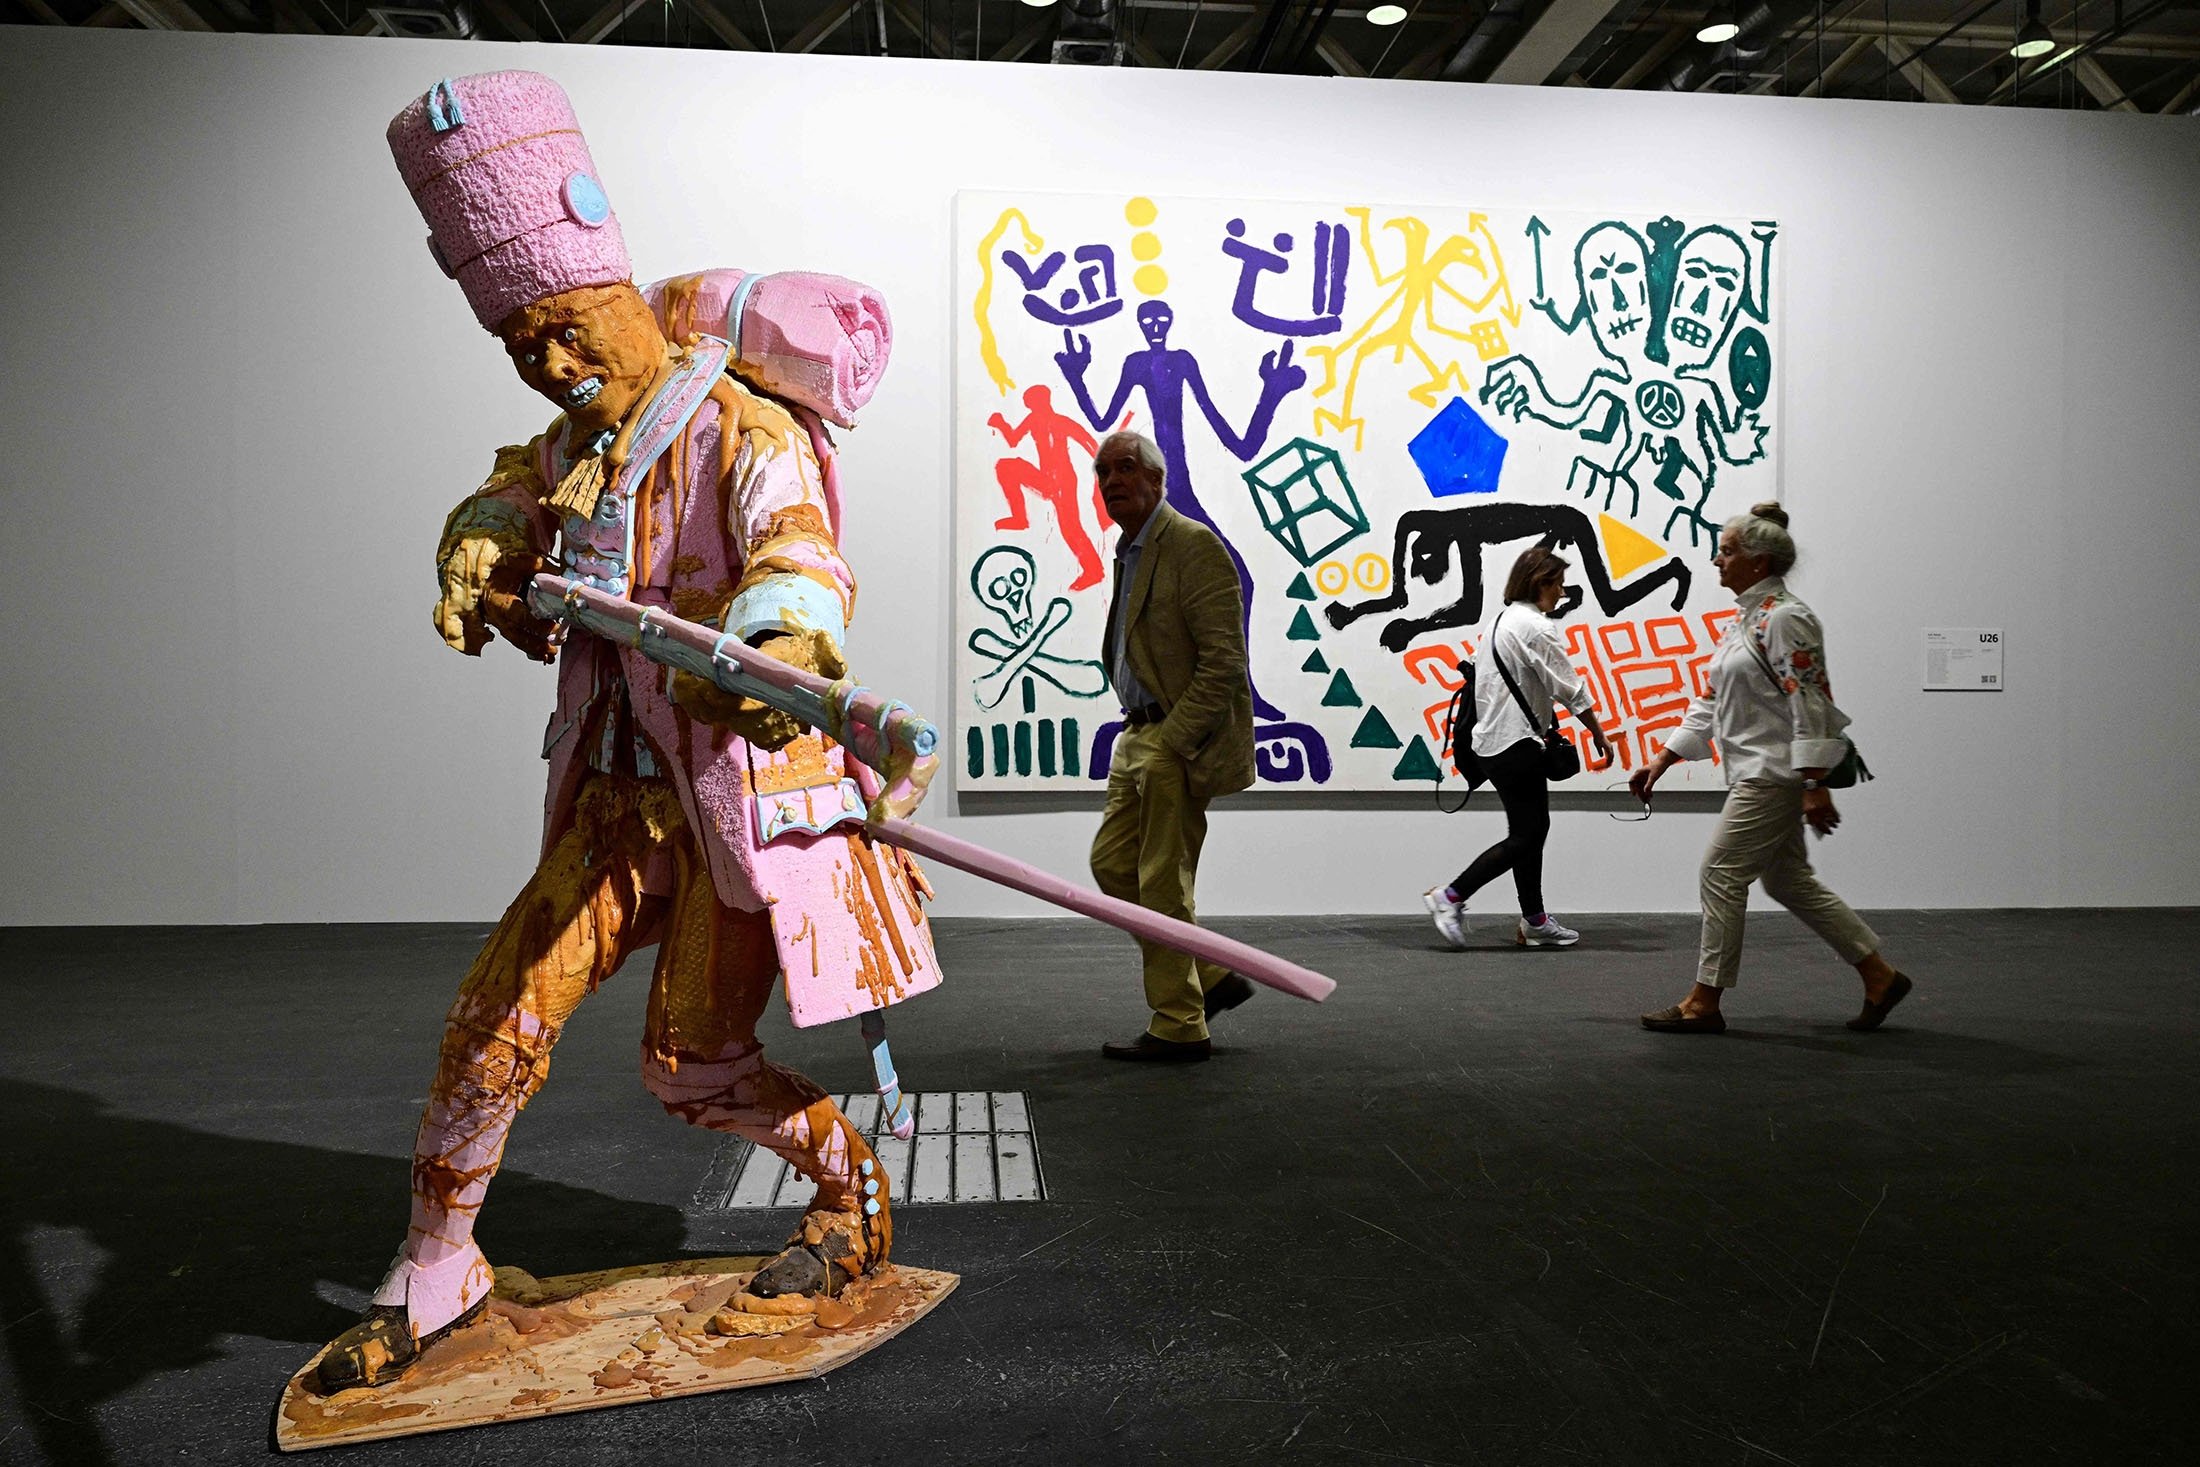 Visitors pass by a Folkert de Jong's artwork "The shooting… 1st July 2006" during a preview day of Art Basel, the world's premier modern and contemporary art fair in Basel, Switzerland, June 14, 2022. (AFP Photo)